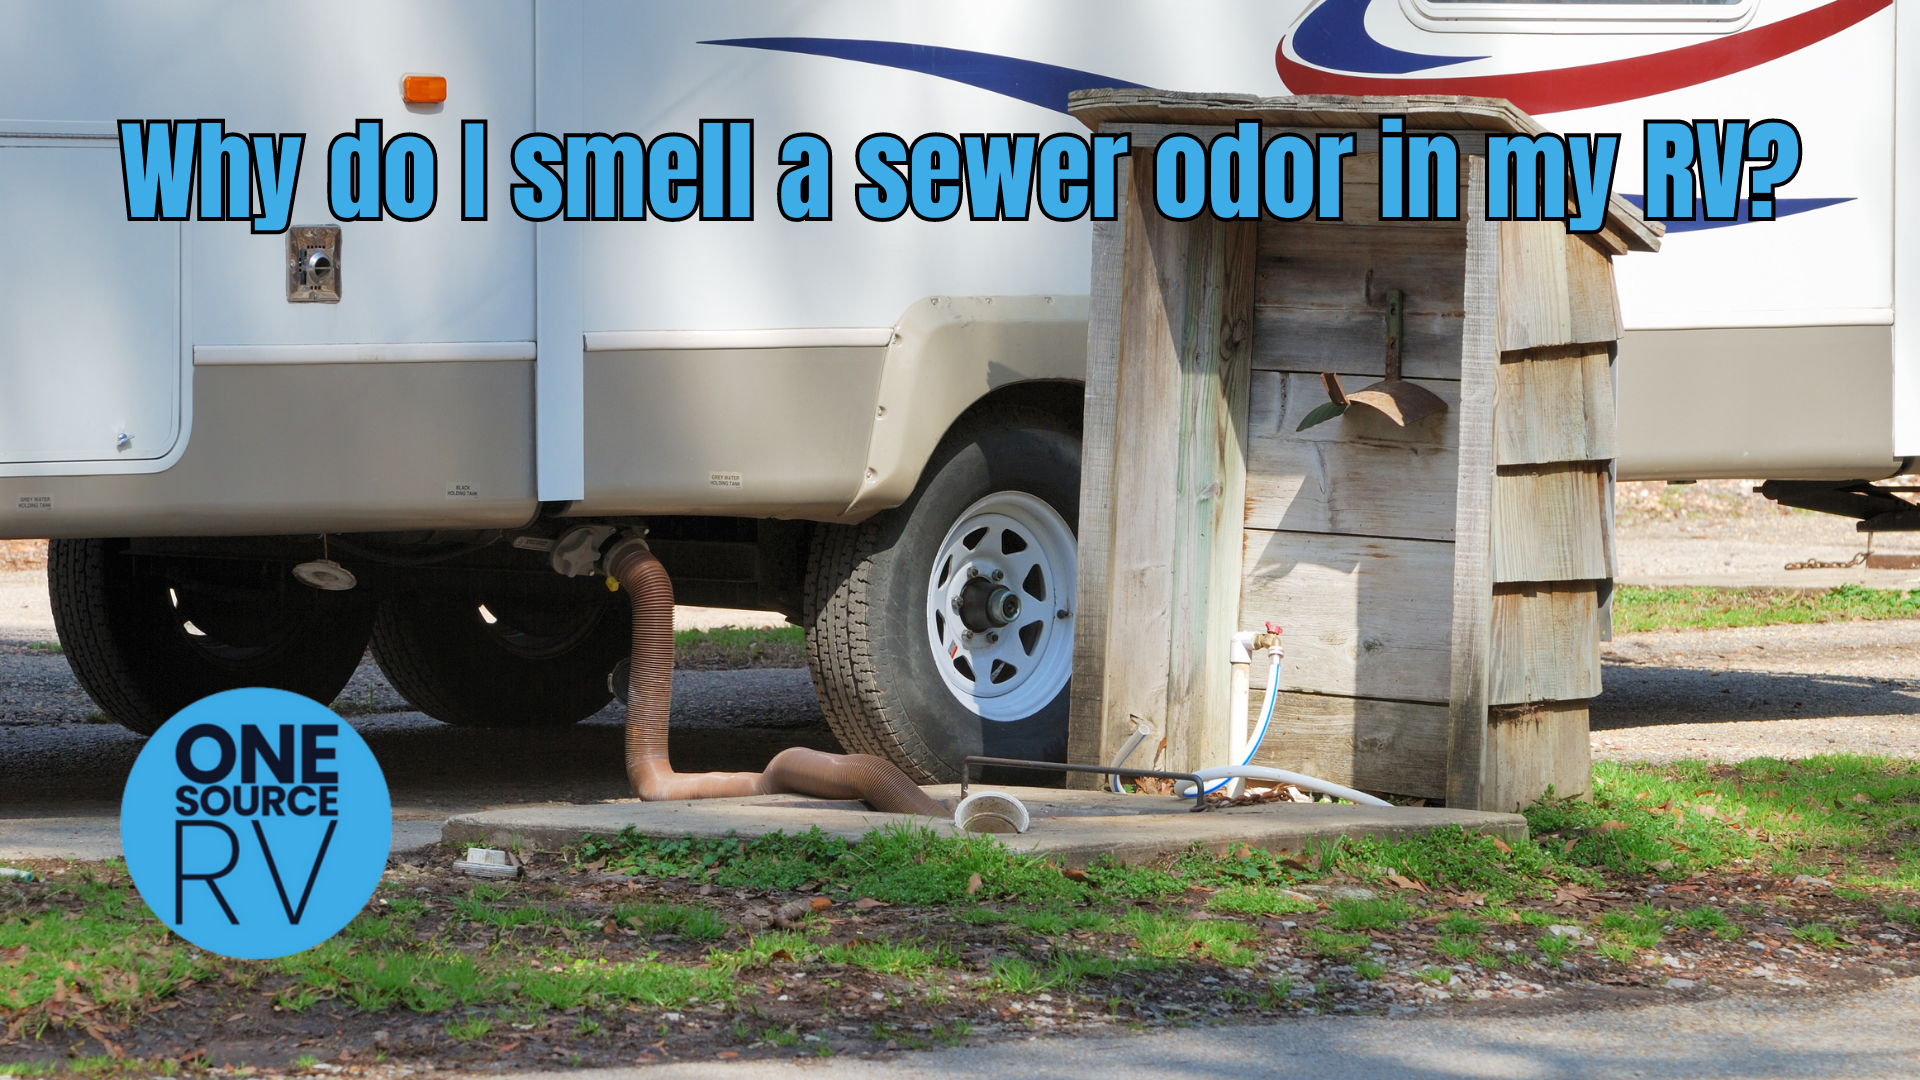 Why do I smell a sewer odor in my RV?